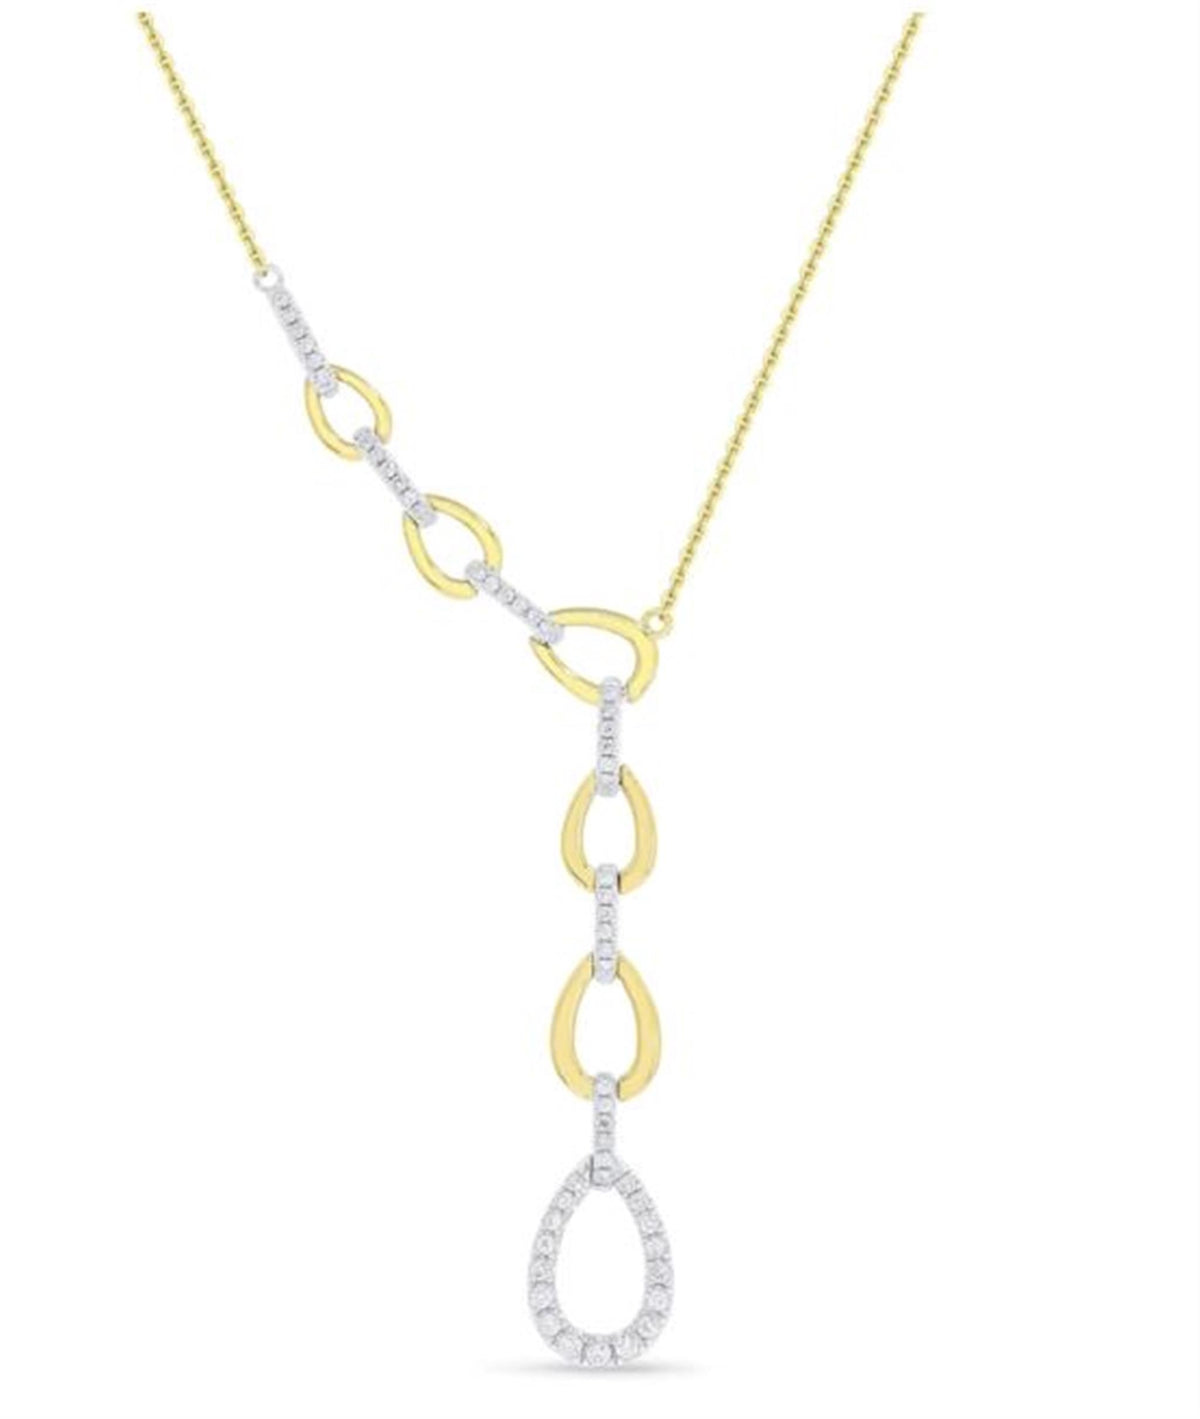 14Kt Yellow & White Gold Link Pendant with 0.32cttw Natural Diamonds